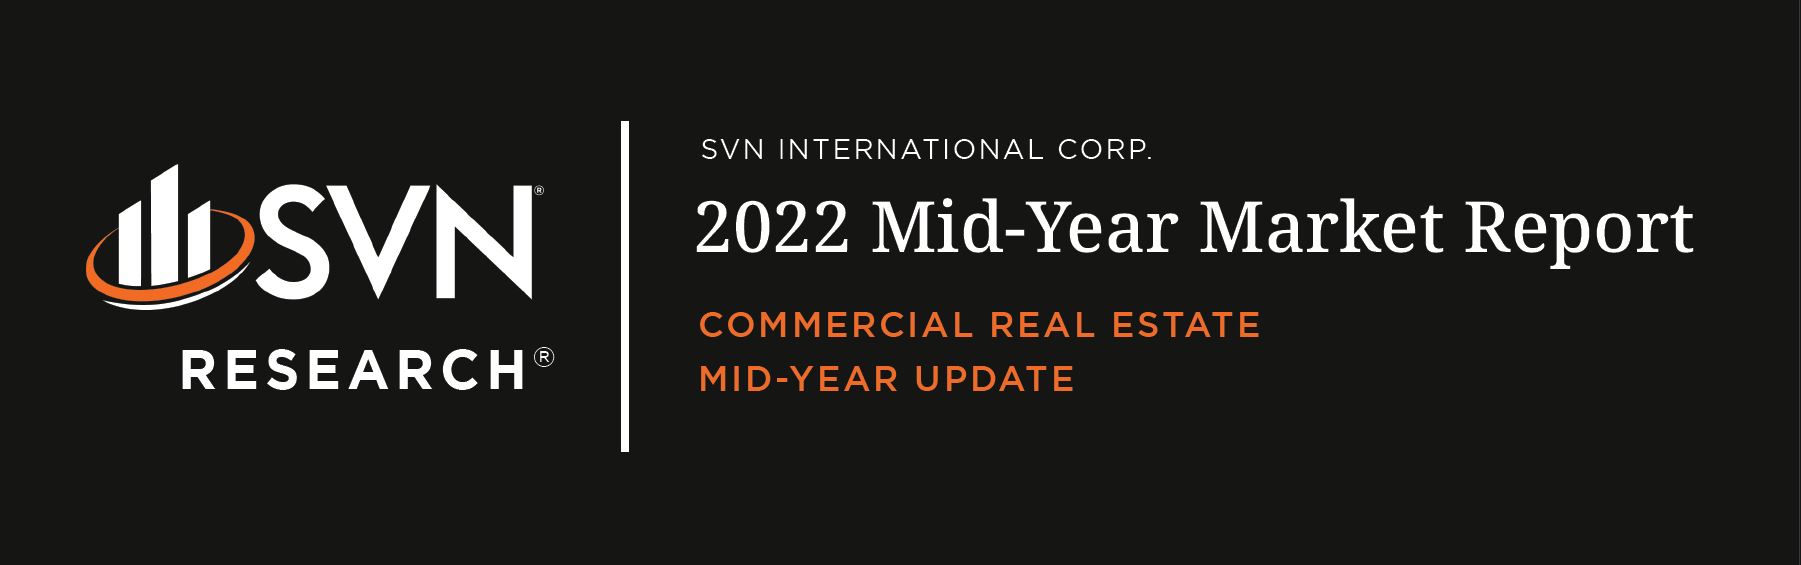 2022 Mid-Year Market Report from SVN | Research